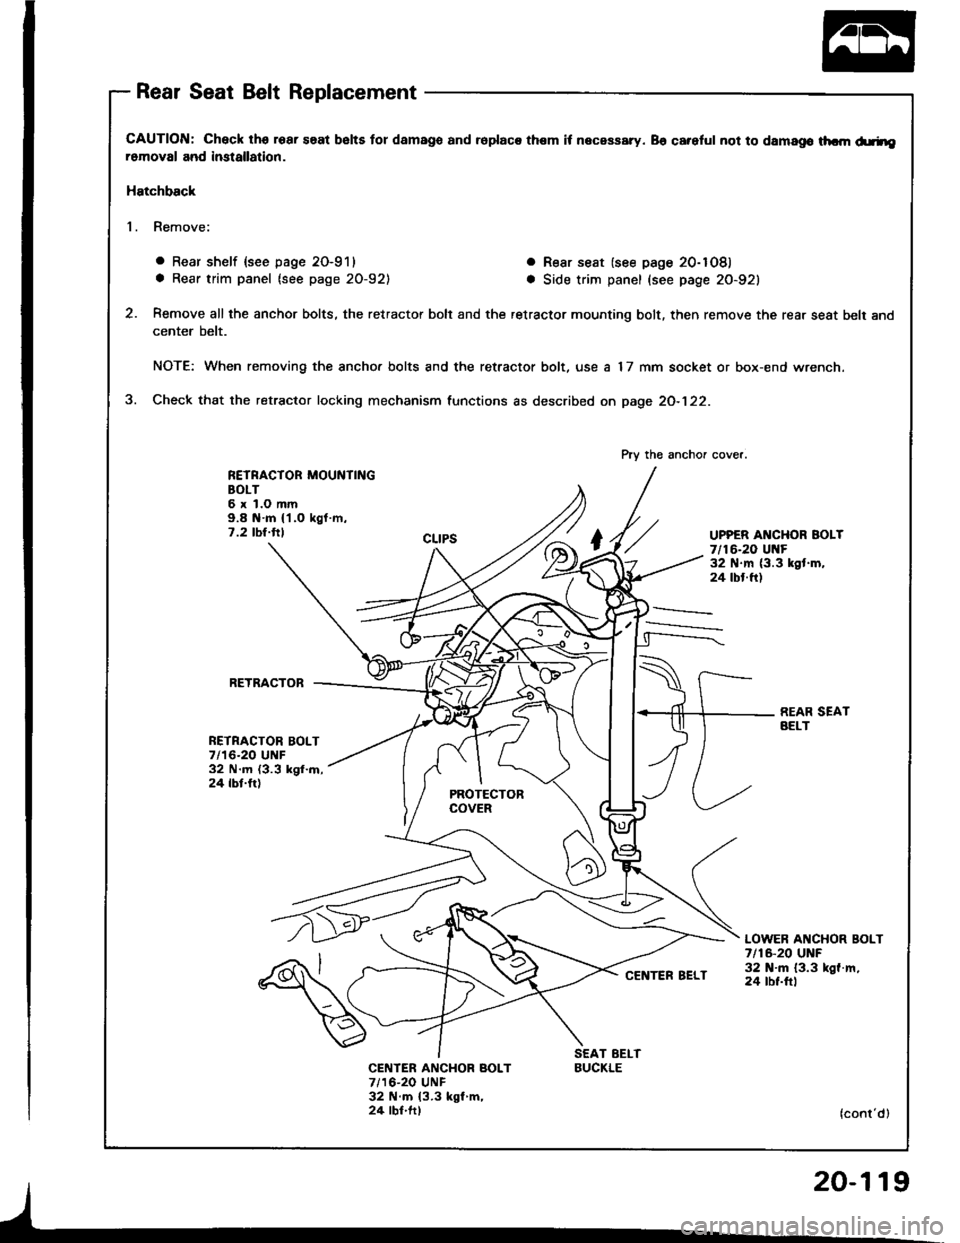 HONDA INTEGRA 1994 4.G Workshop Manual Rear Seat Belt Replacement
CAUTION: Check lhs roar saat bslts tor damago and ioplaca them it necassary. 86 careful not to damago thcm d.rheromoval and imtallation.
Hatchback
1. Remove:
o Rear shelf {s